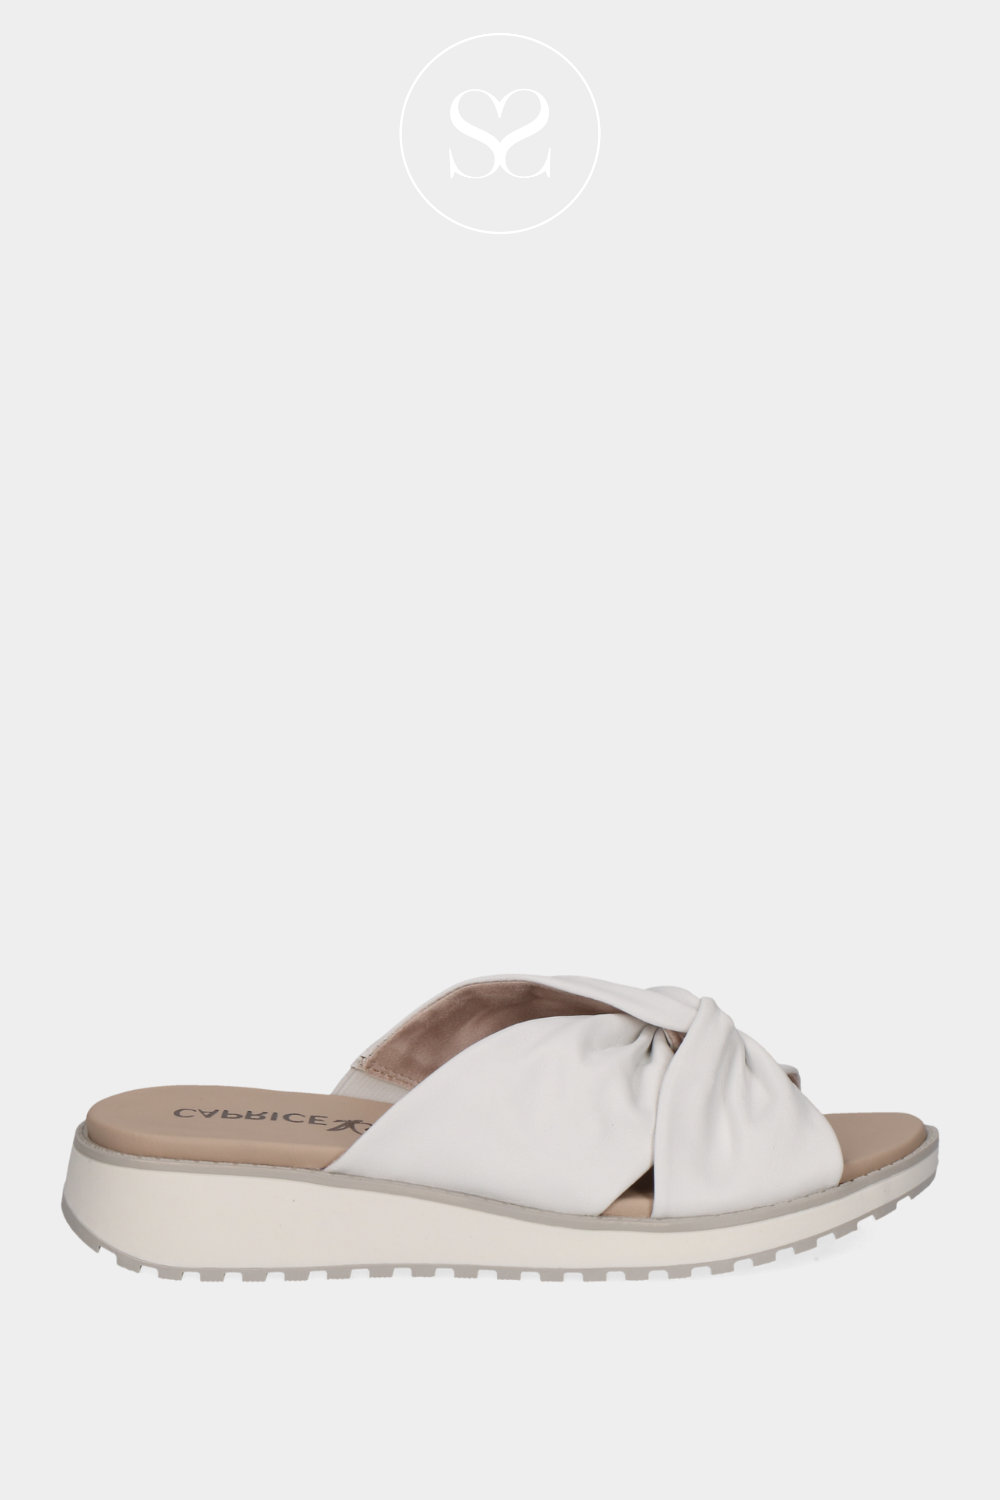 CAPRICE 9-27202-42 WHITE LEATHER SLIP ON SANDALS WITH CRISS CROSS STRAPS 